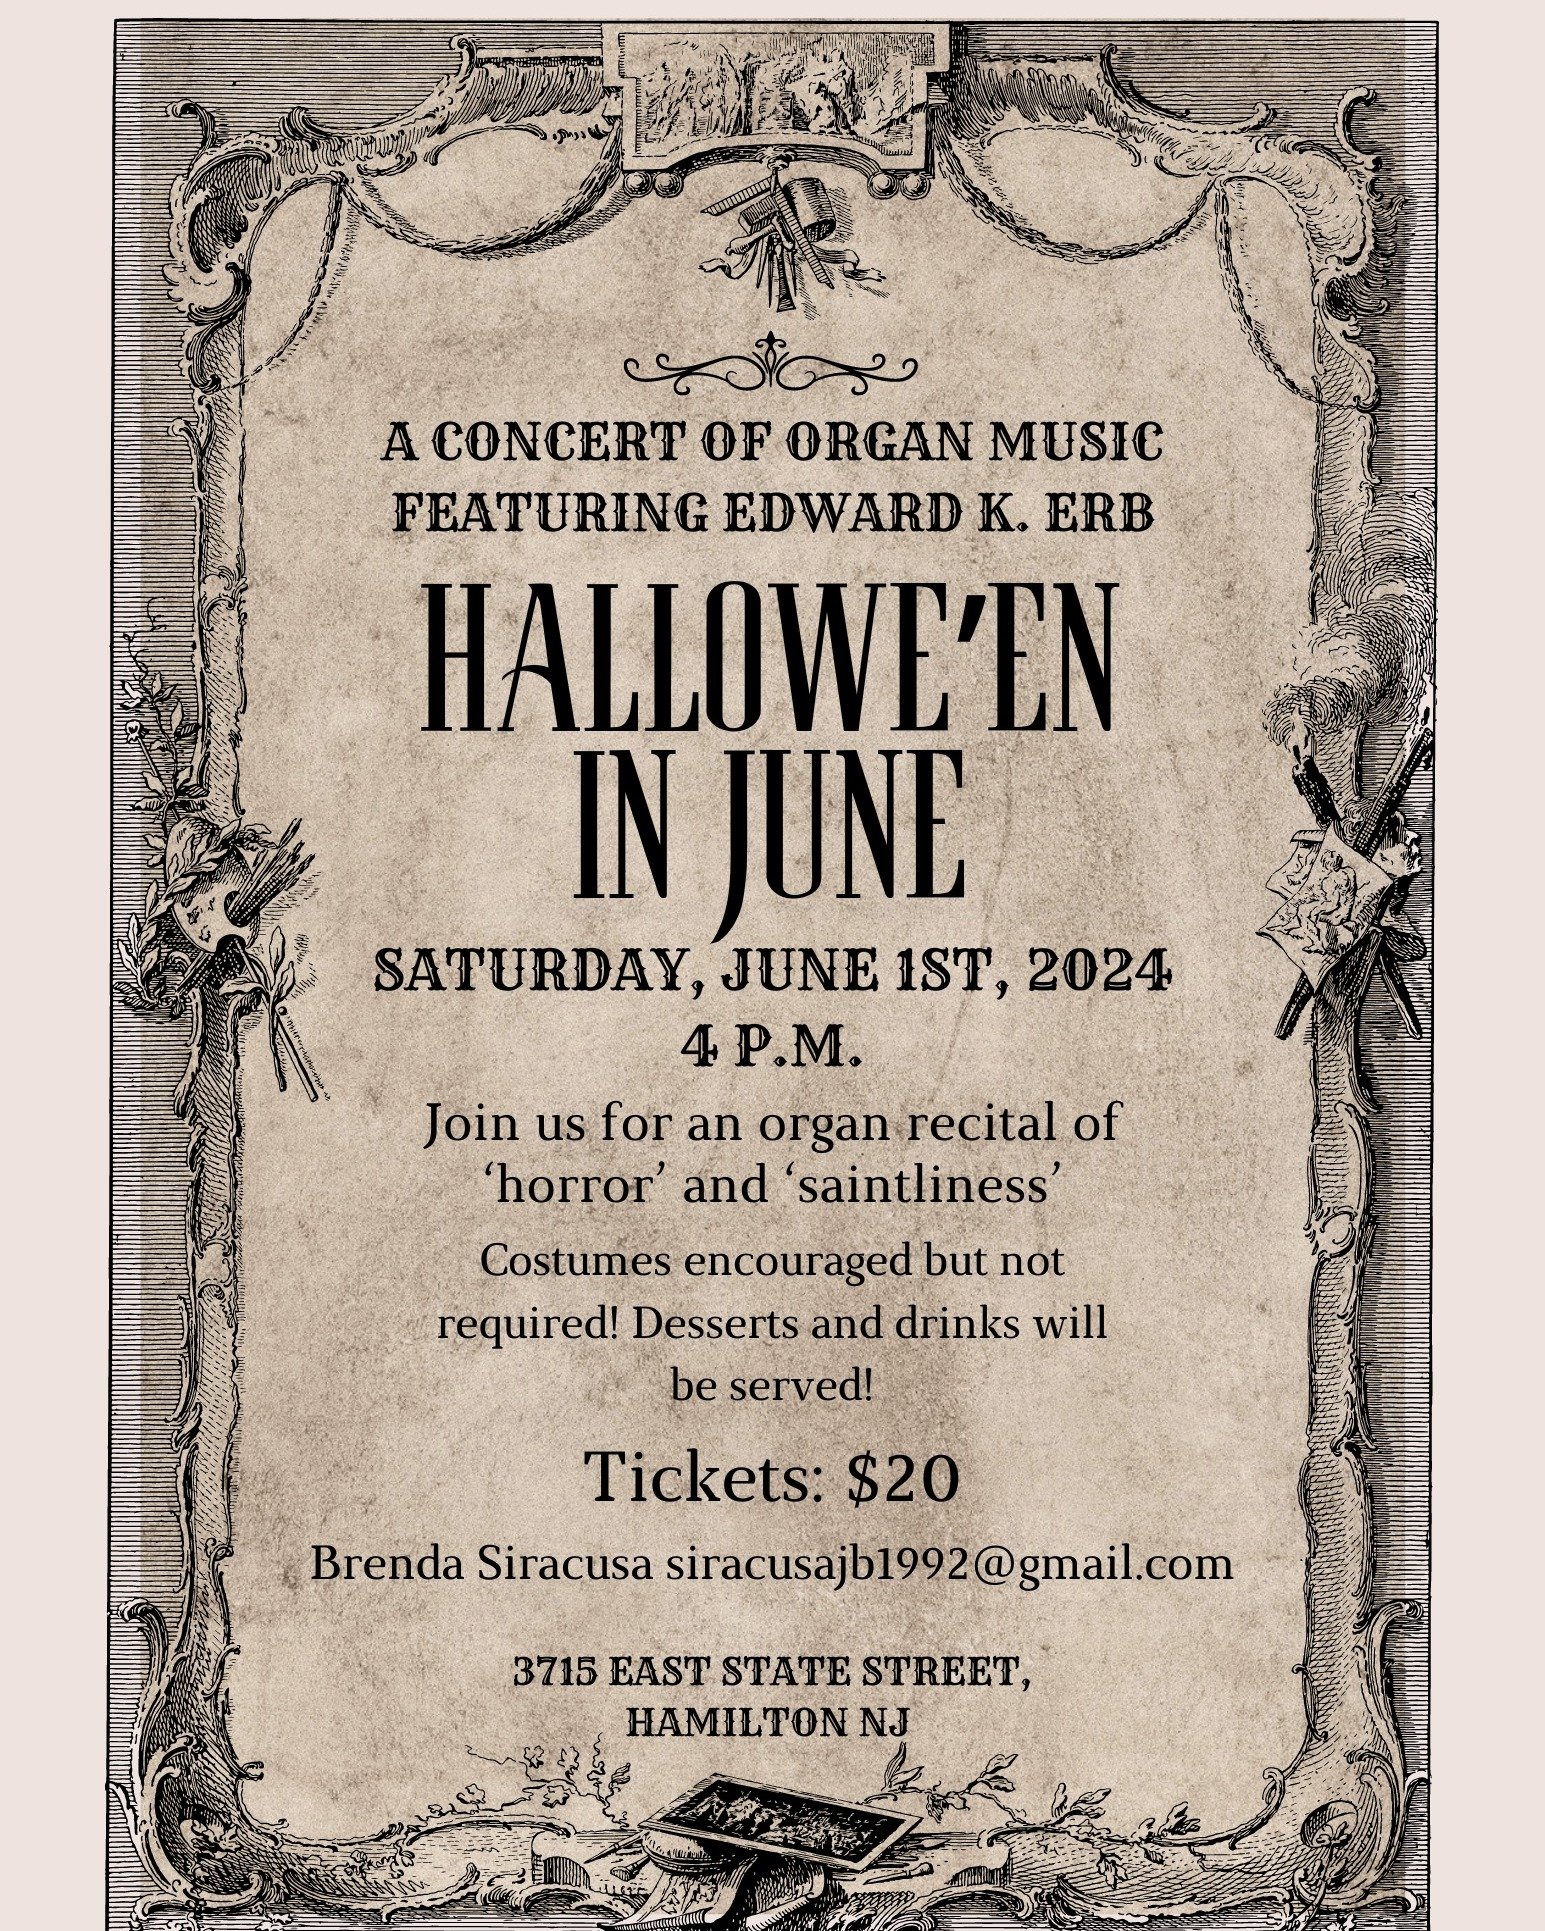 Please join us on Saturday, June 1st at 4 p.m. for Father Edward Erb's &quot;Hallowe'en in June&quot; organ recital. Desserts and beverages will be served. Costumes are encouraged, but not required. Tickets are $20 and can be purchased on any Sunday 